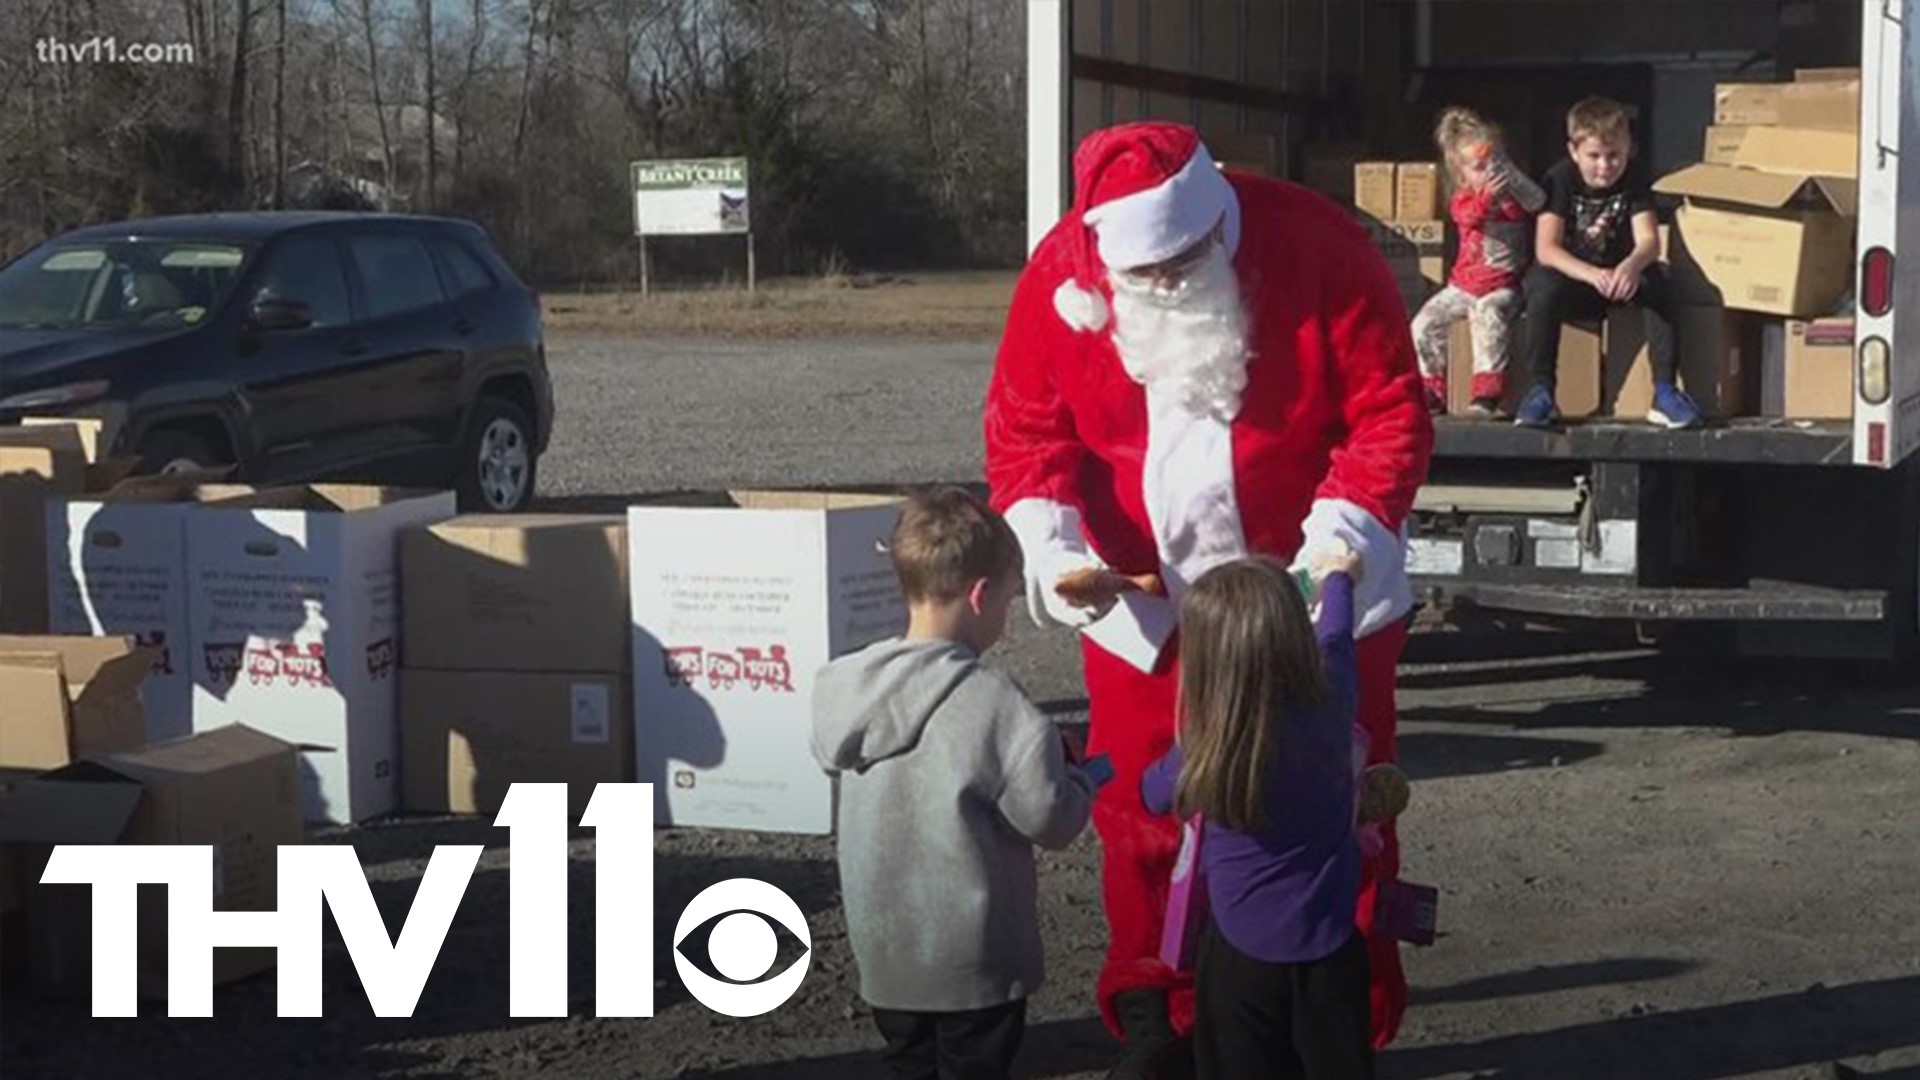 With Christmas fast approaching, families in need are looking for ways to provide gifts and a little cheer.